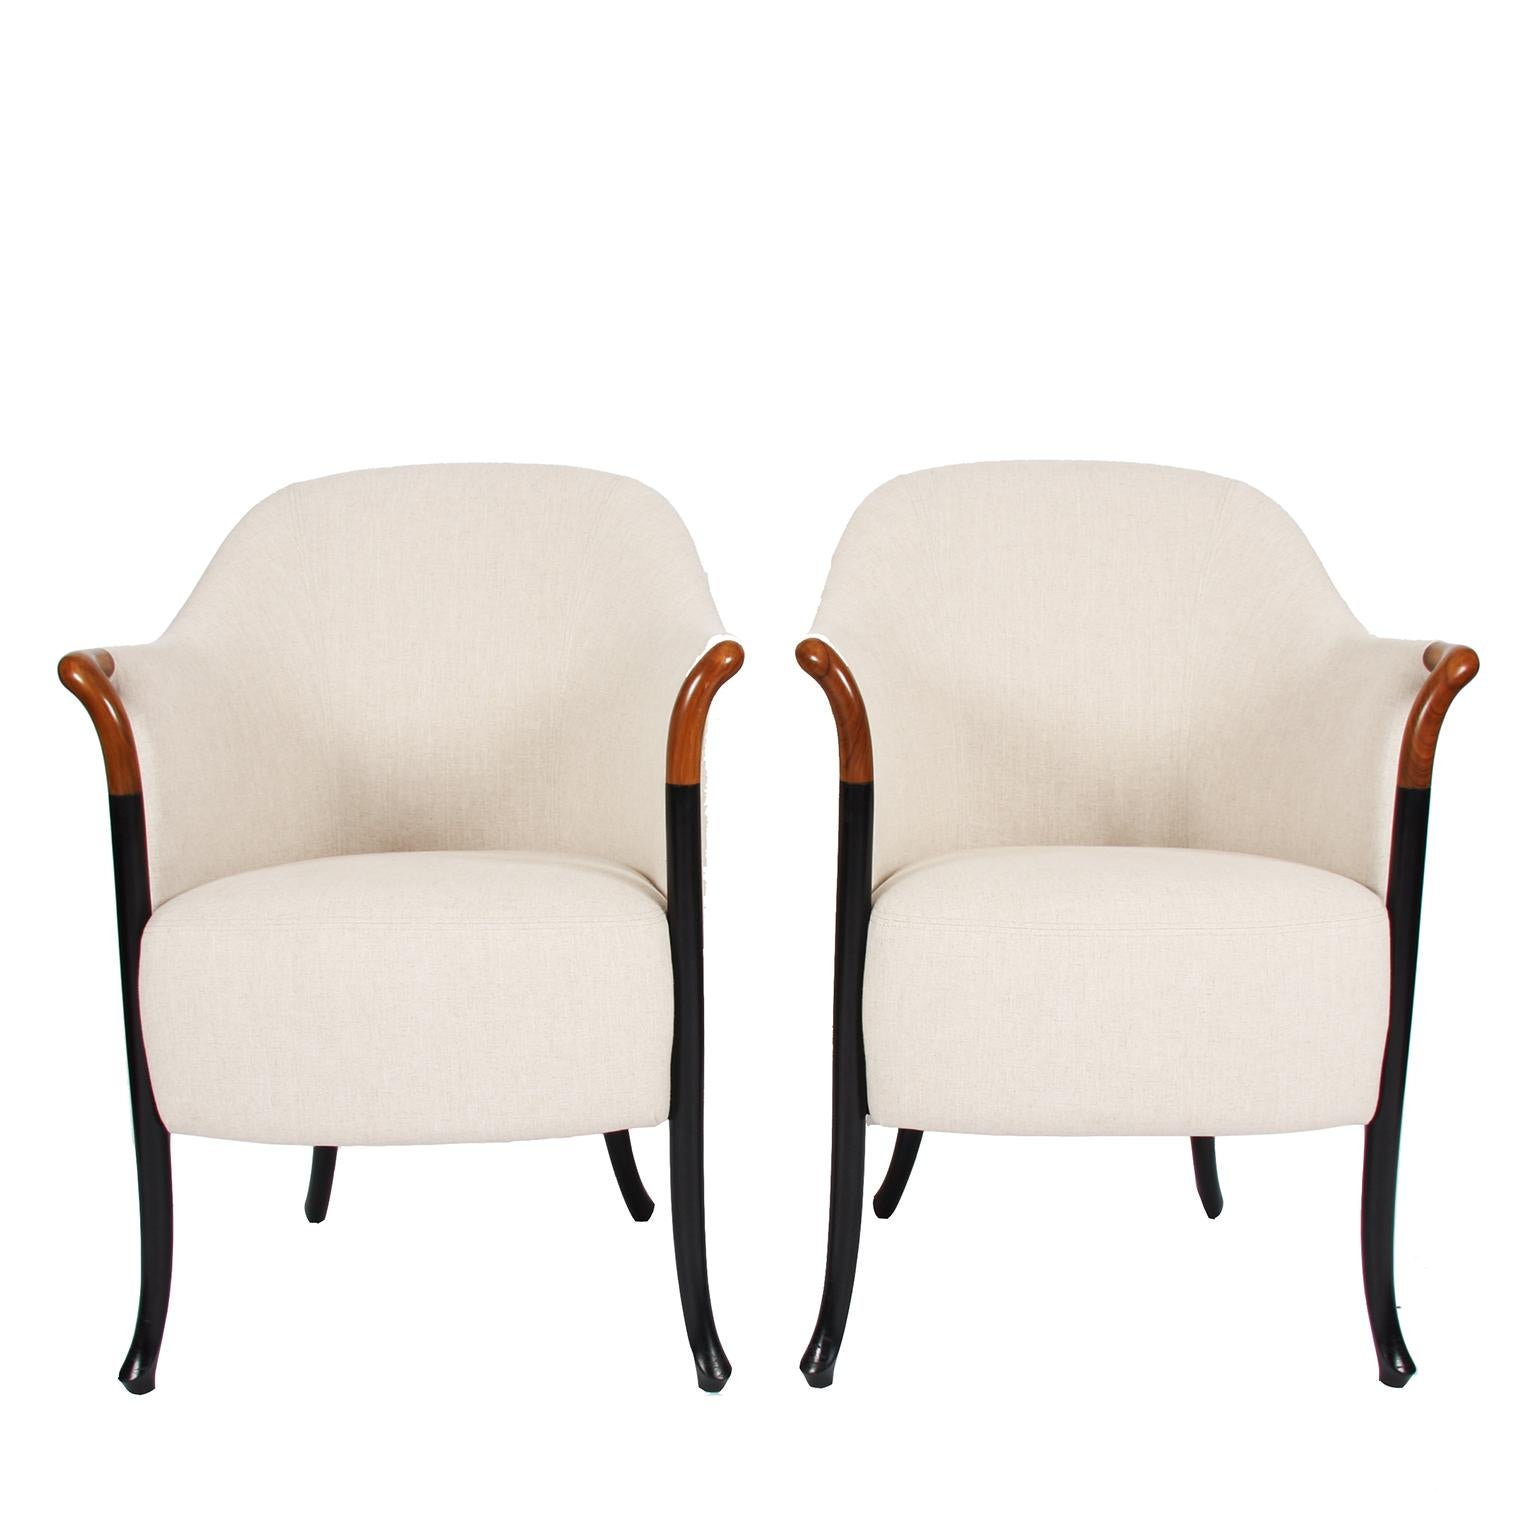 Italian 1980s

A superb pair of neautral linen armchairs, by Italian maker Giorgetti.

In excellent condition. Reupholstered. 

This quality armchair 'Progetti', by first class furniture manufacturer Giorgetti Italia, is upholstered in a